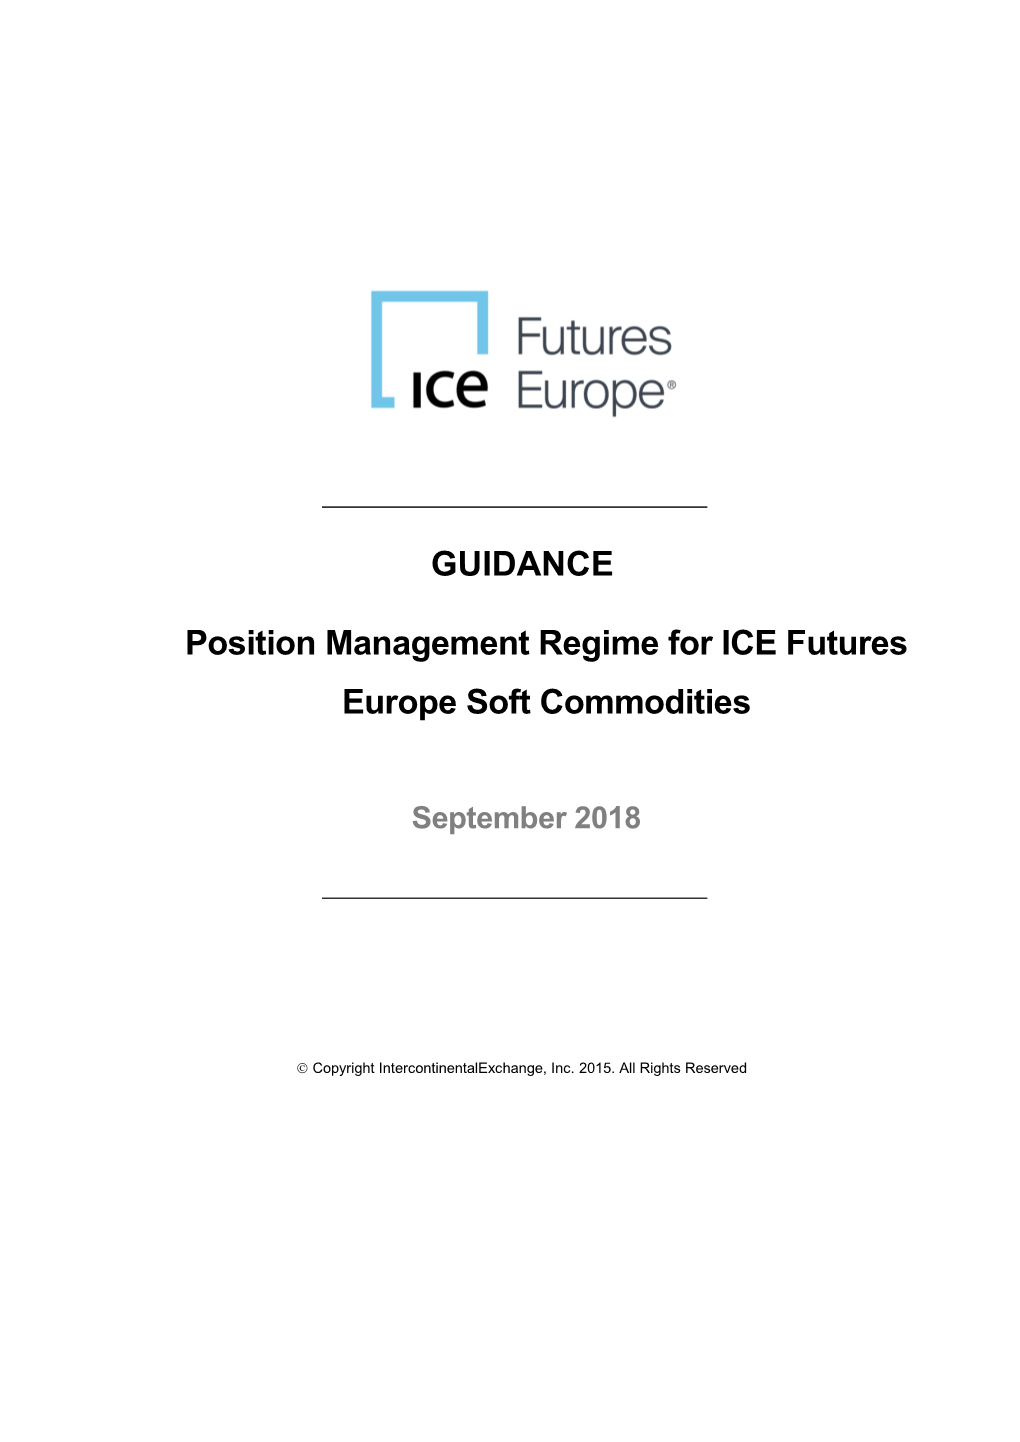 GUIDANCE Position Management Regime for ICE Futures Europe